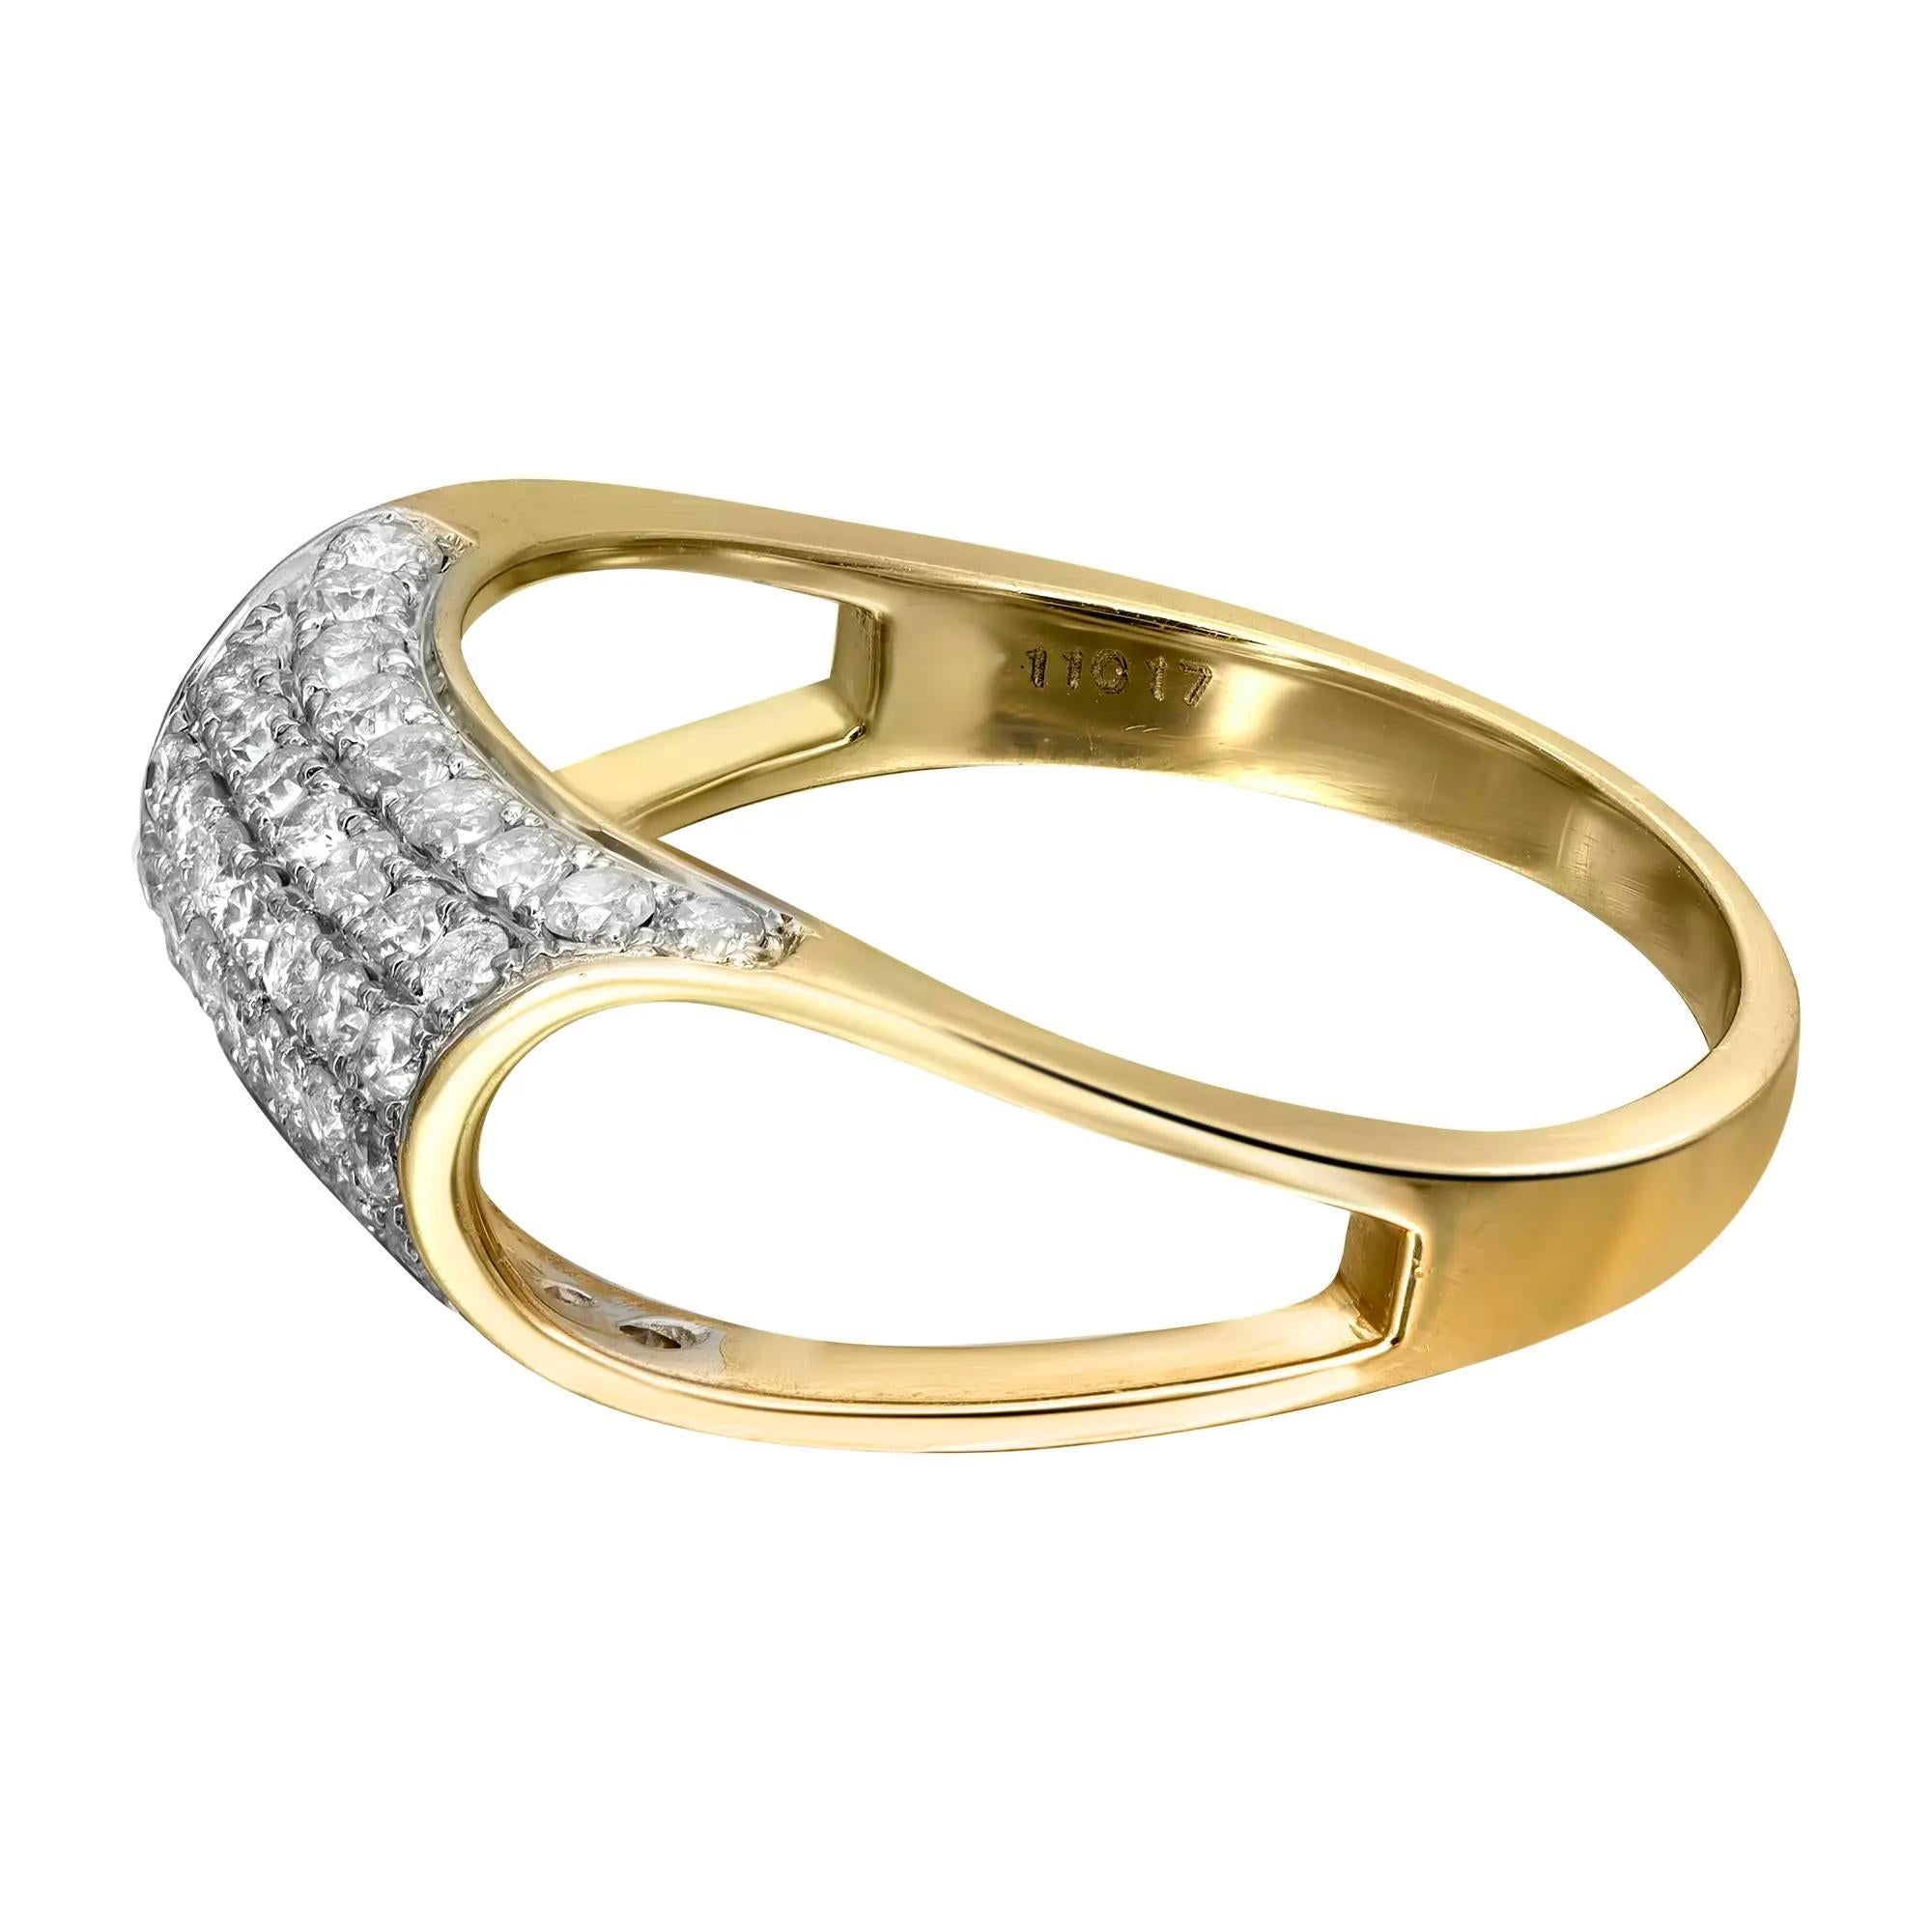 0.60cttw Pave Set Round Cut Diamond Ladies Cocktail Ring 14k Yellow Gold In New Condition For Sale In New York, NY